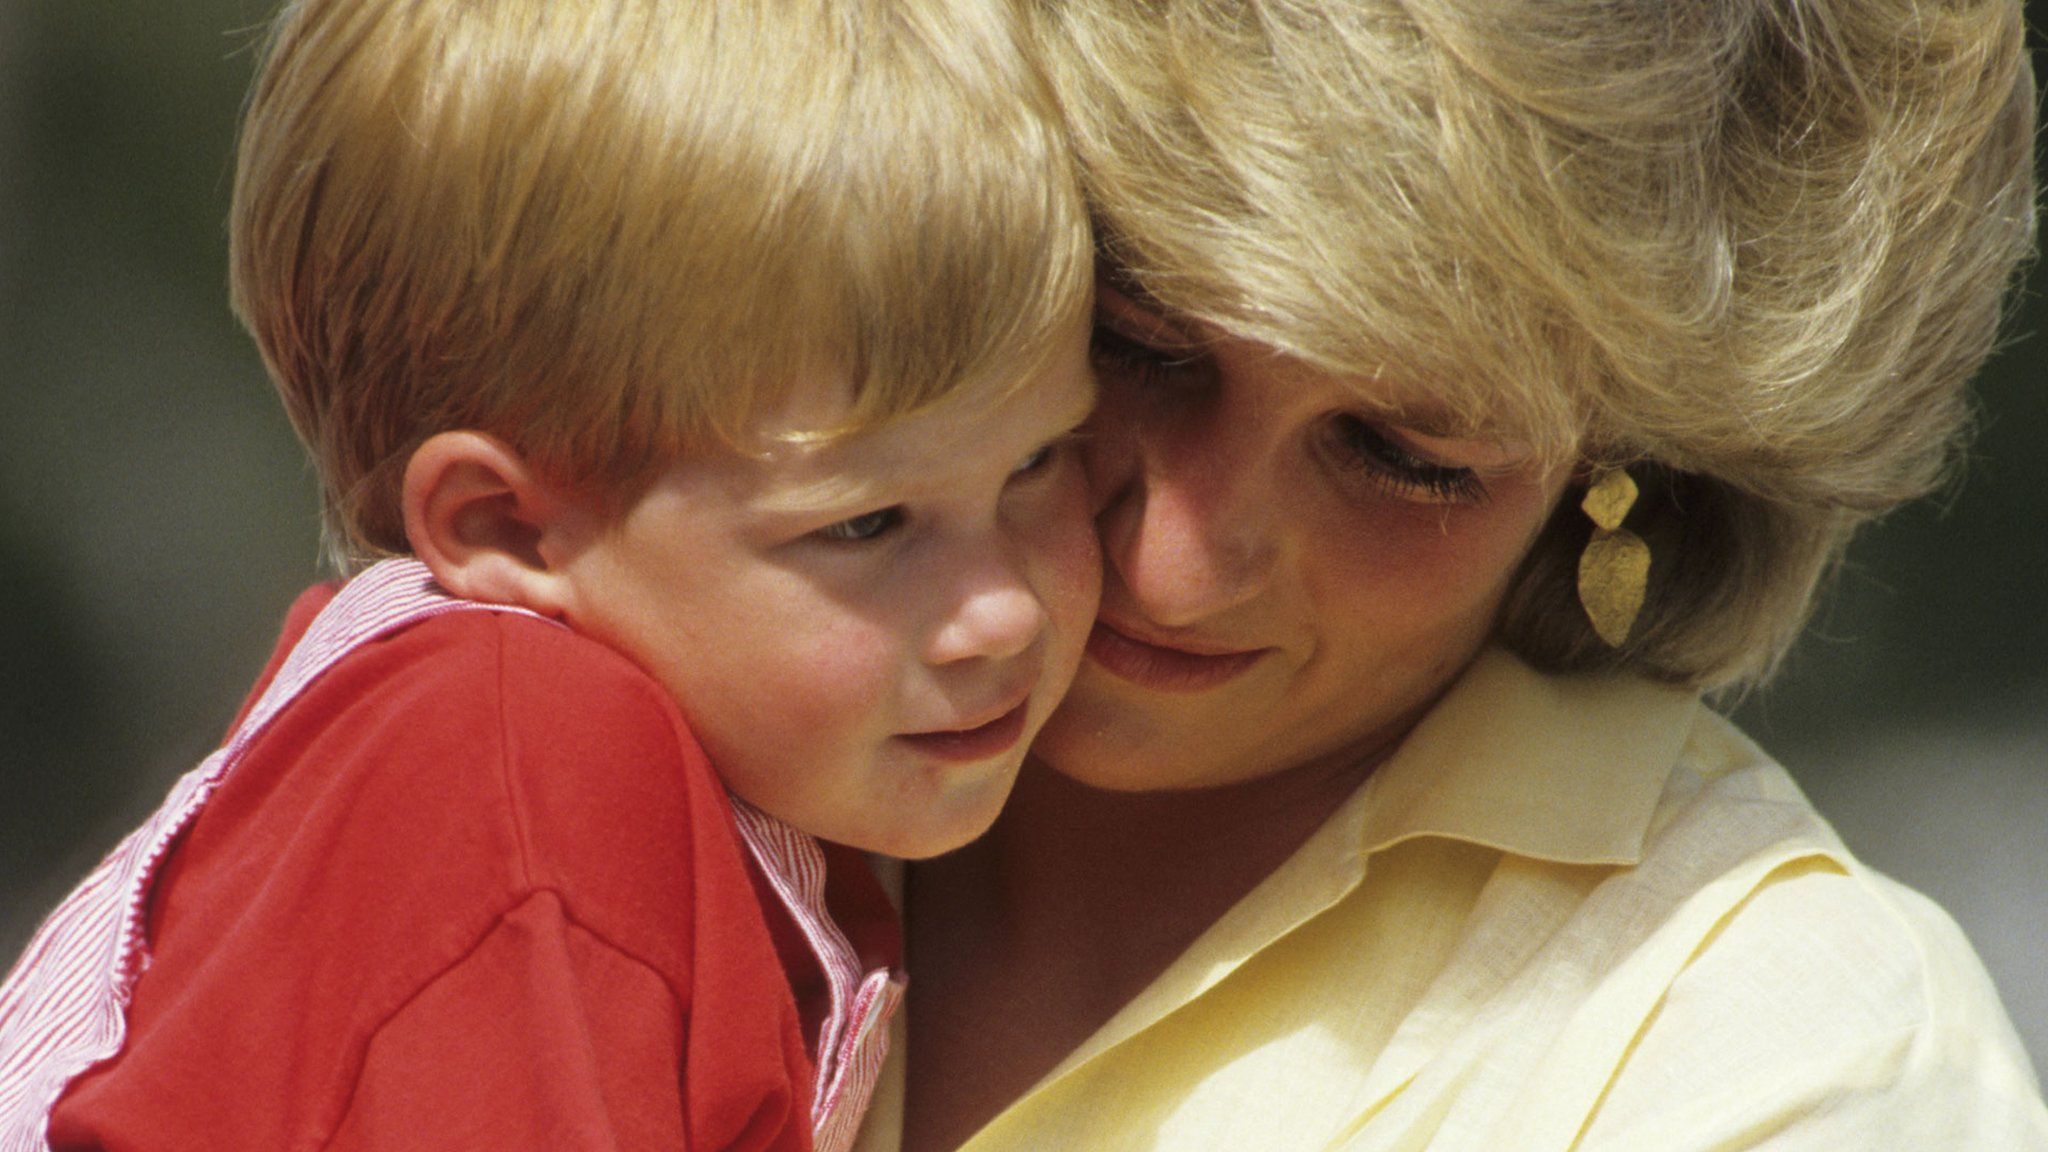 Prince Harry and Diana, Princess of Wales, in 1987